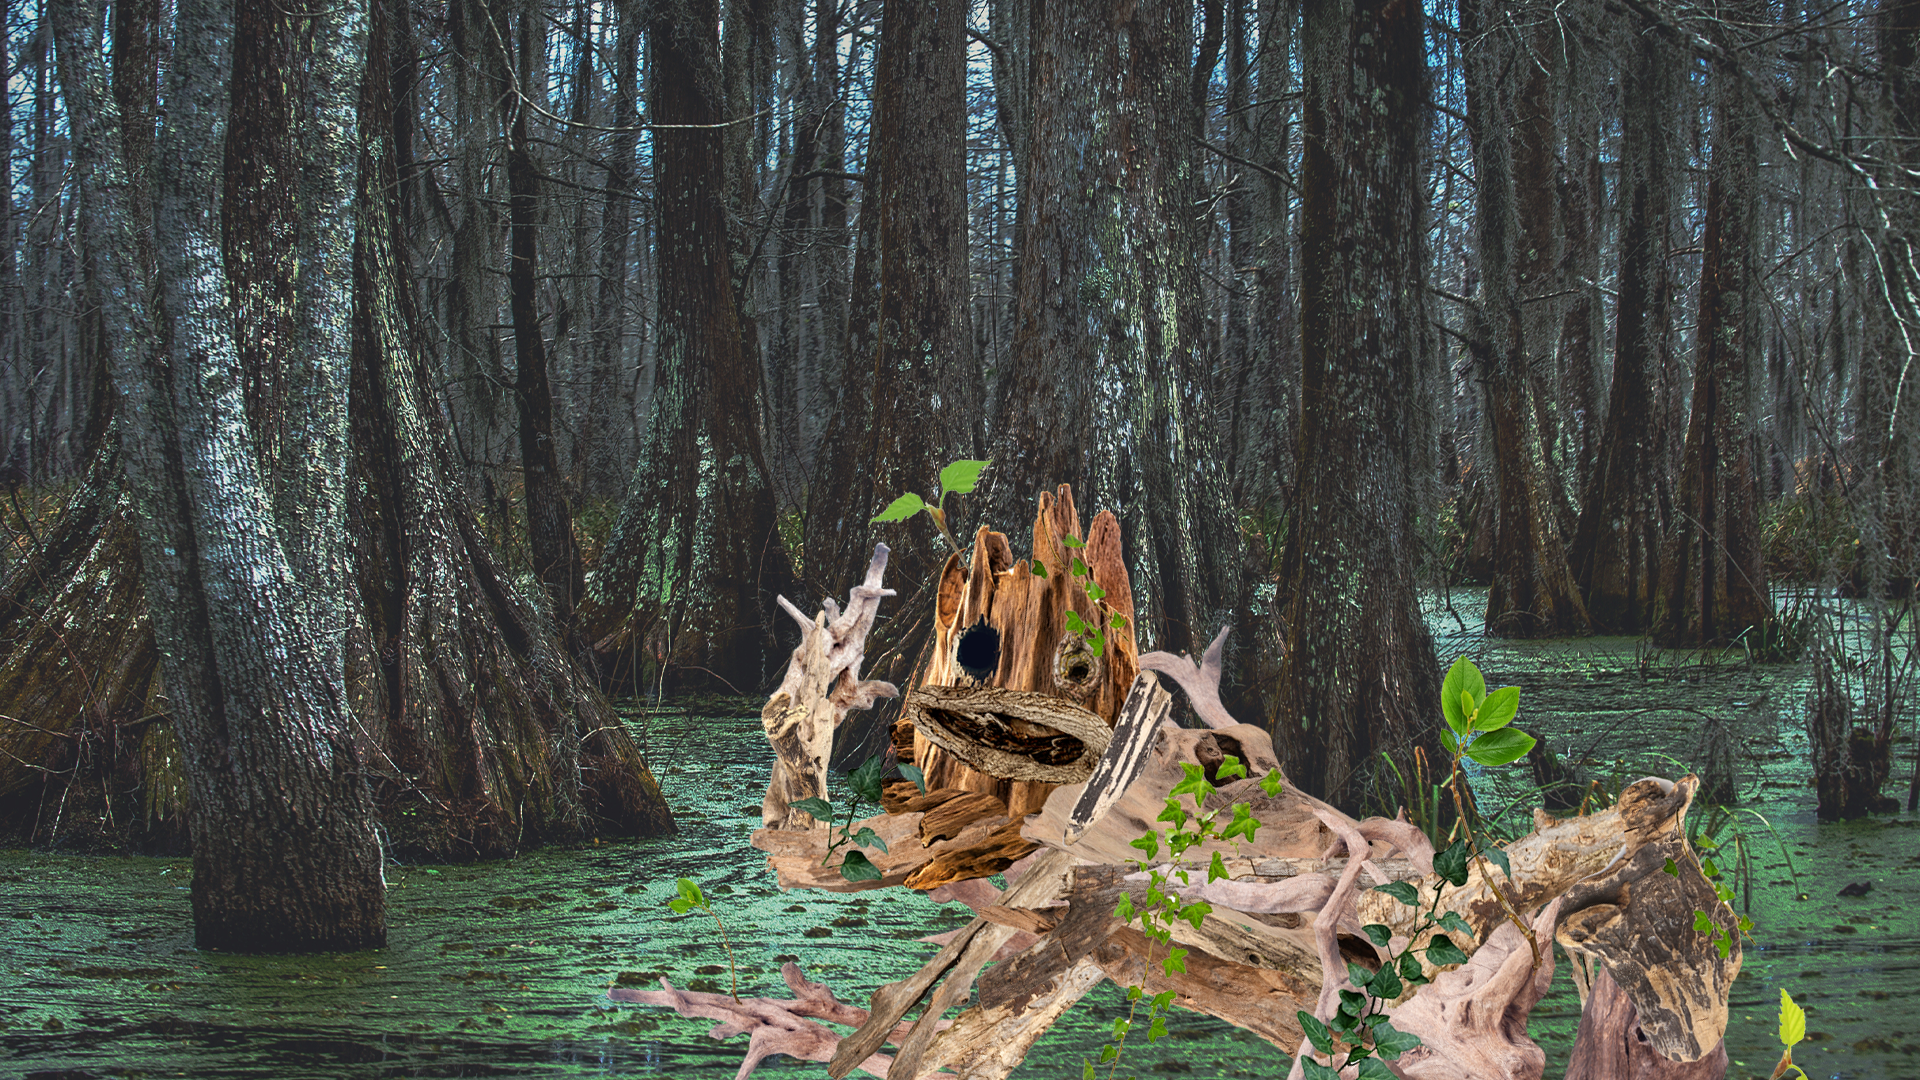 A swamp monster in the swamp